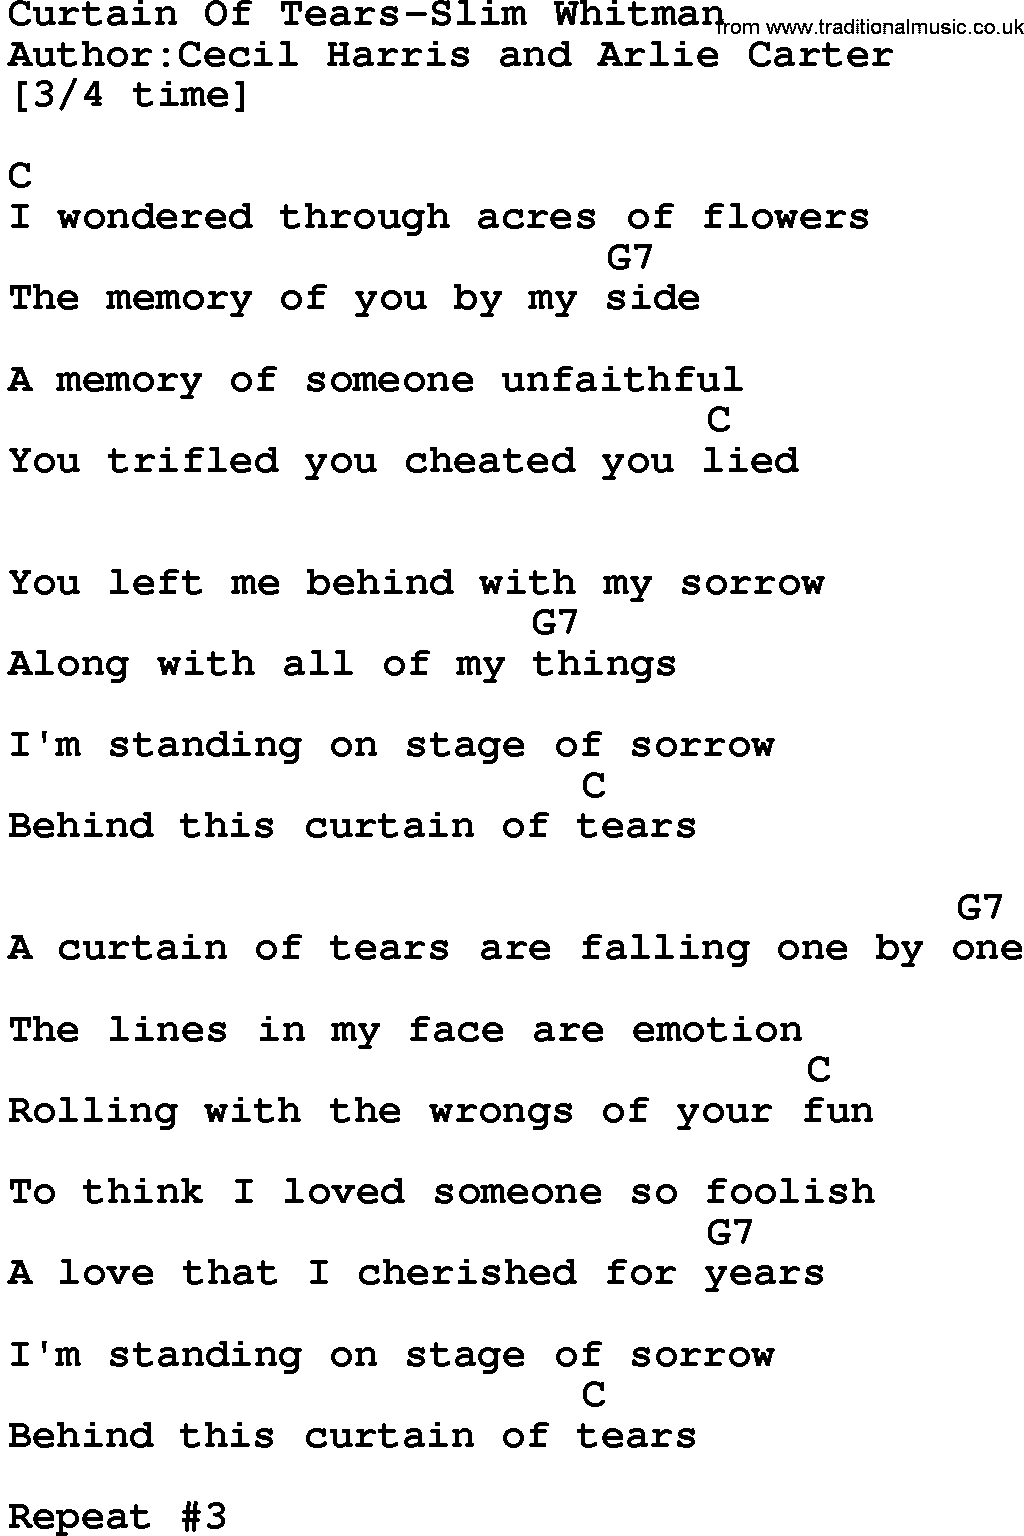 Country music song: Curtain Of Tears-Slim Whitman lyrics and chords